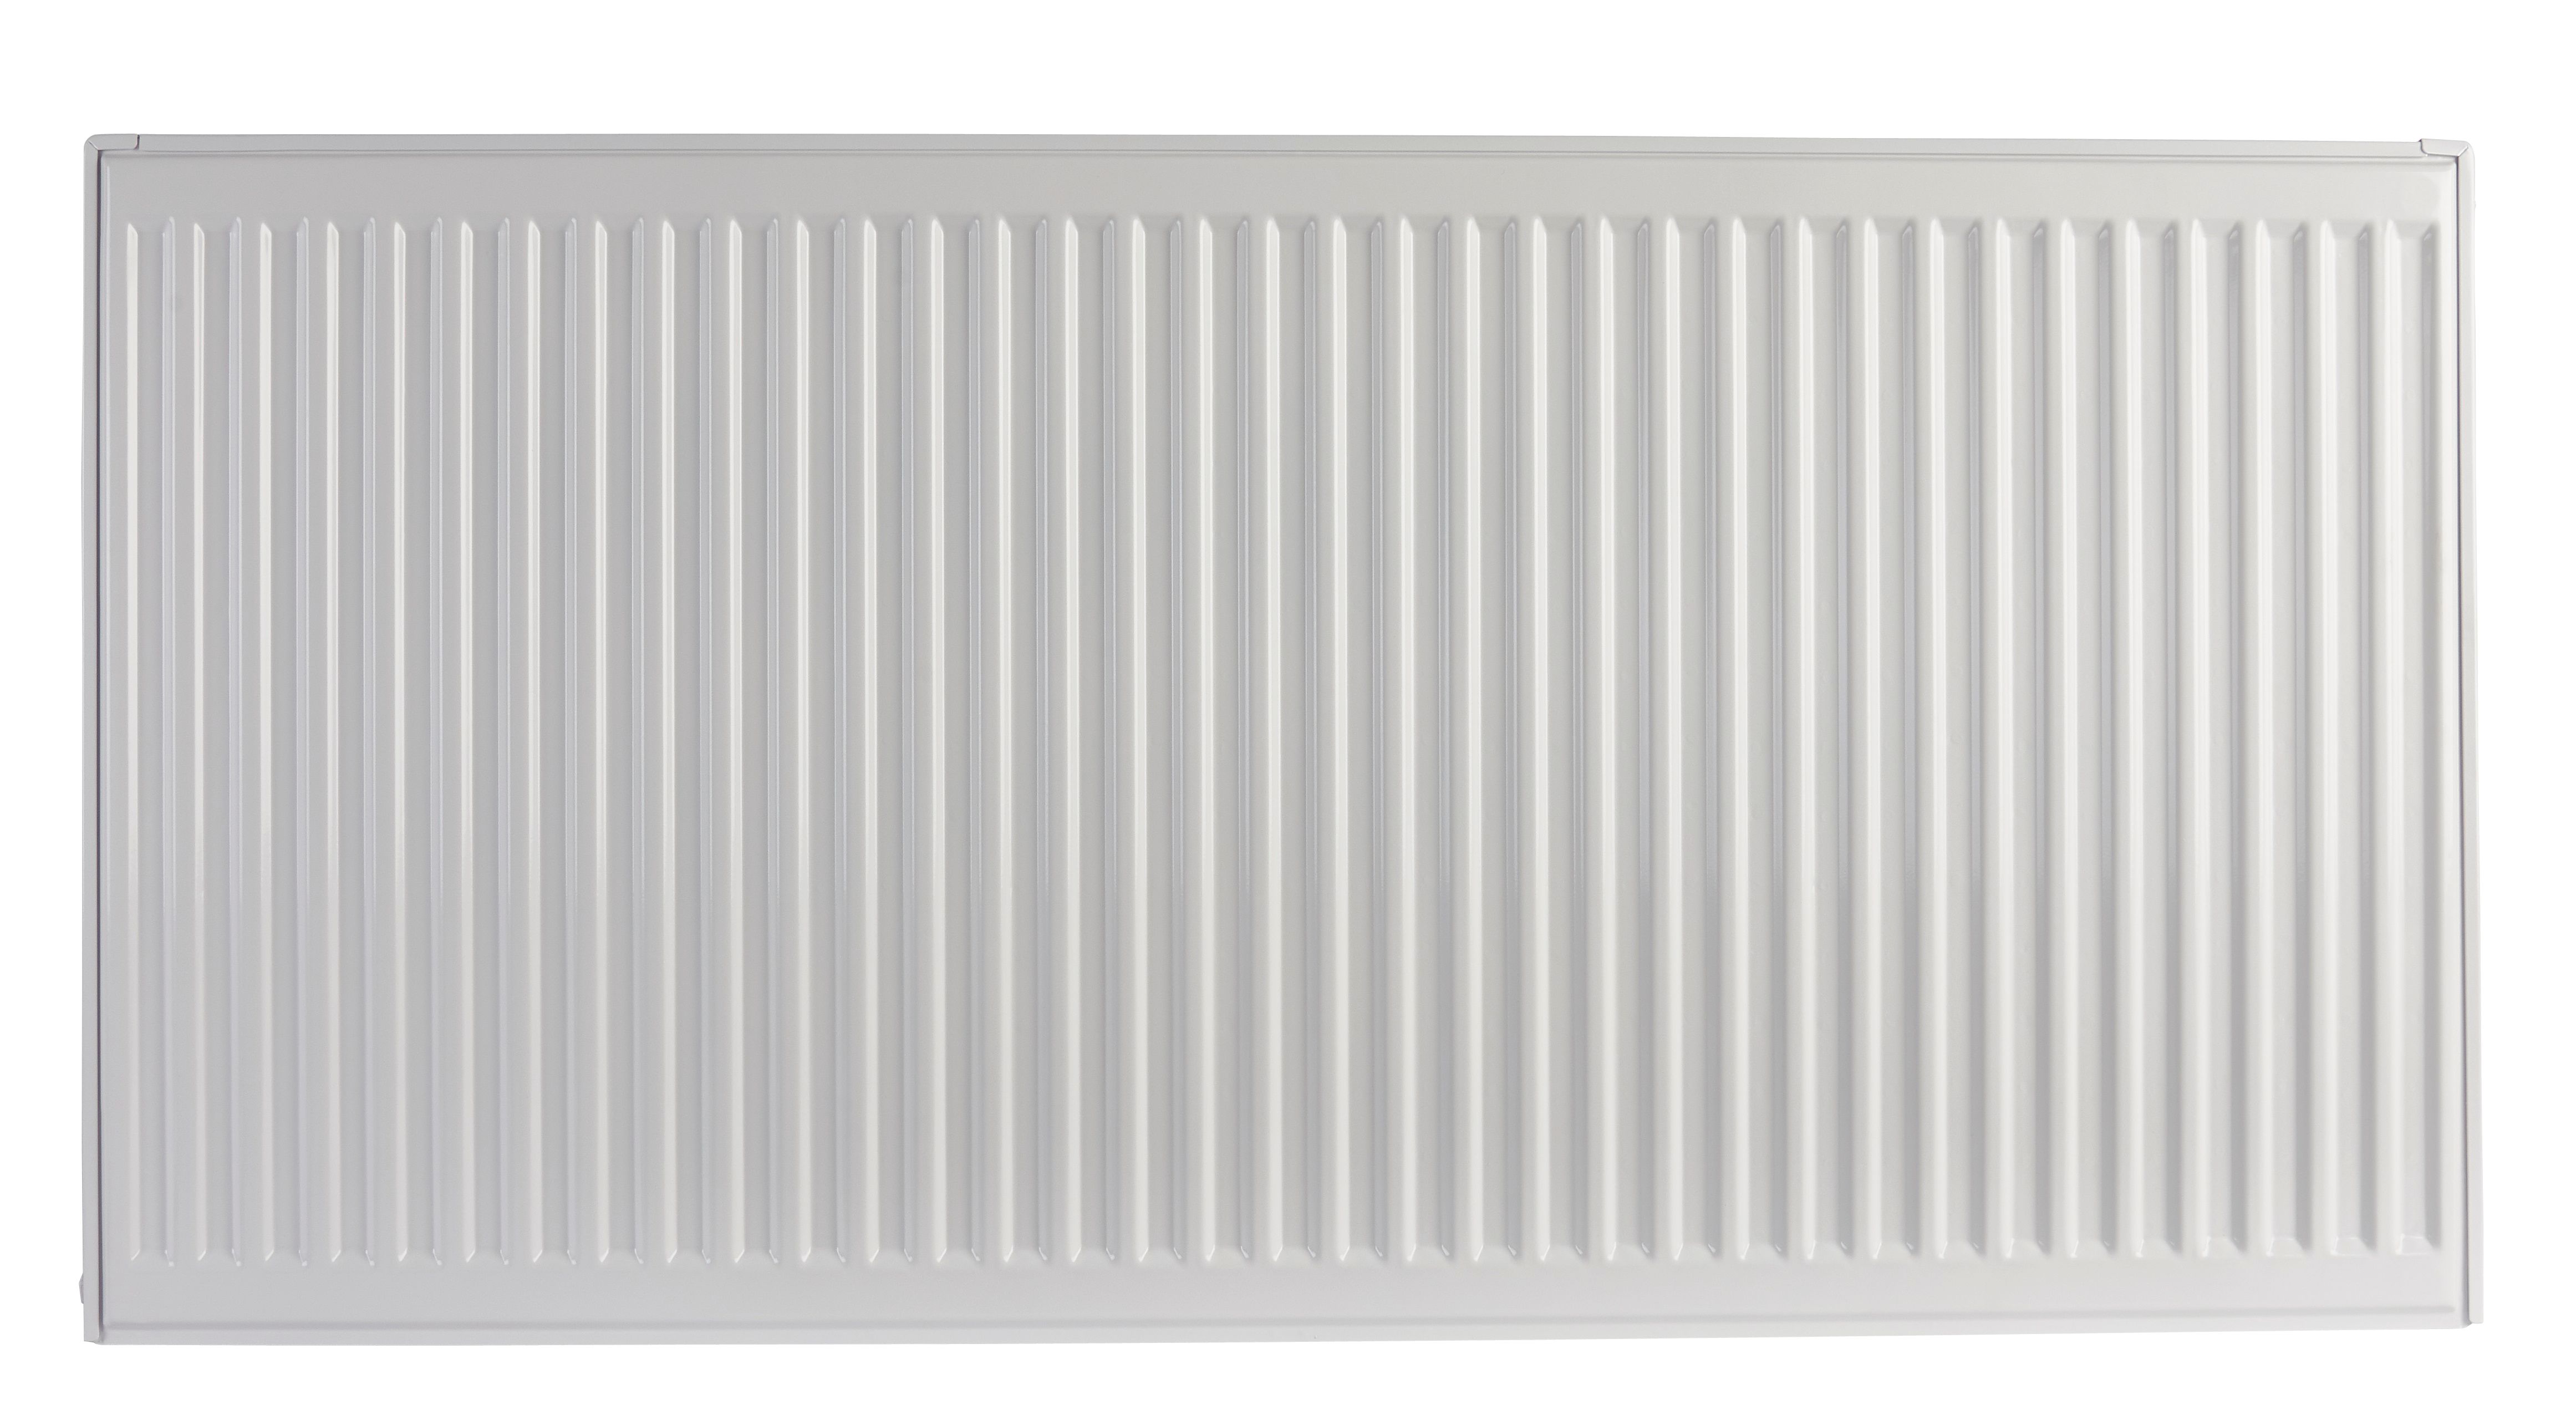 Image of Homeline by Stelrad 500 x 600mm Type 22 Double Panel Premium Double Convector Radiator